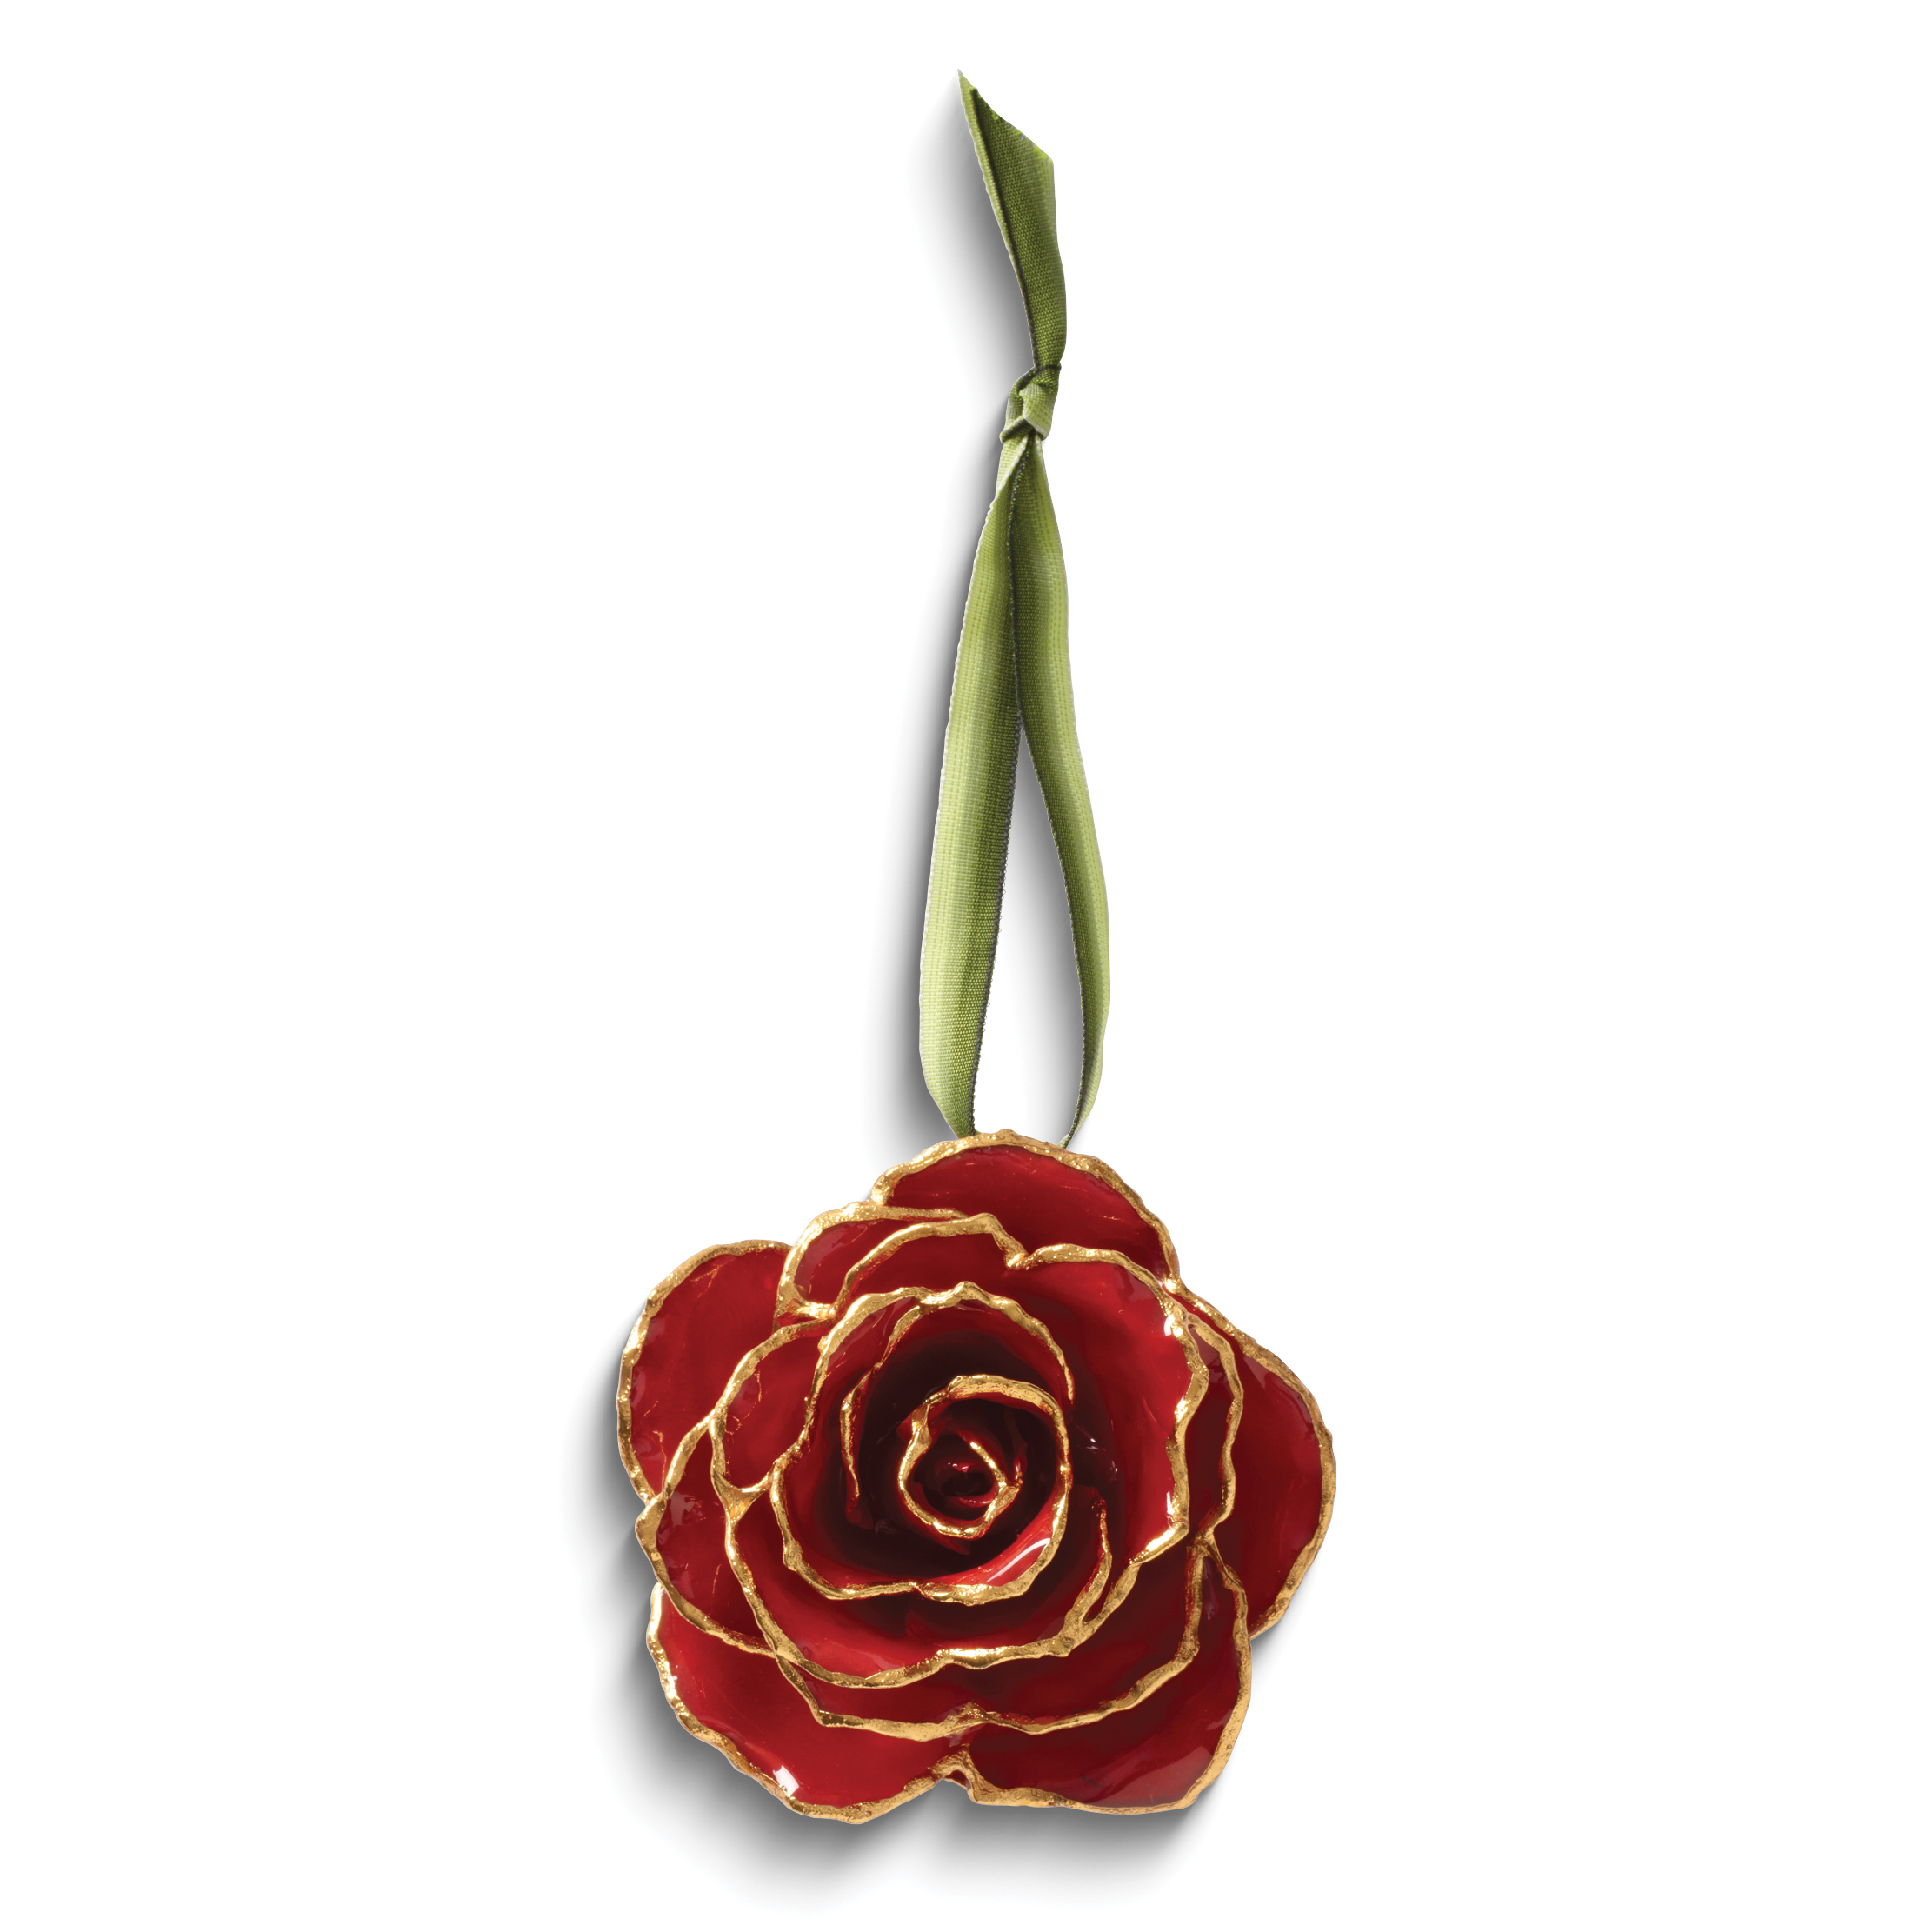 Lacquer Dipped 24k Gold Trim Decorative Ranking integrated 1st place GM3913 Indefinitely Red Rose